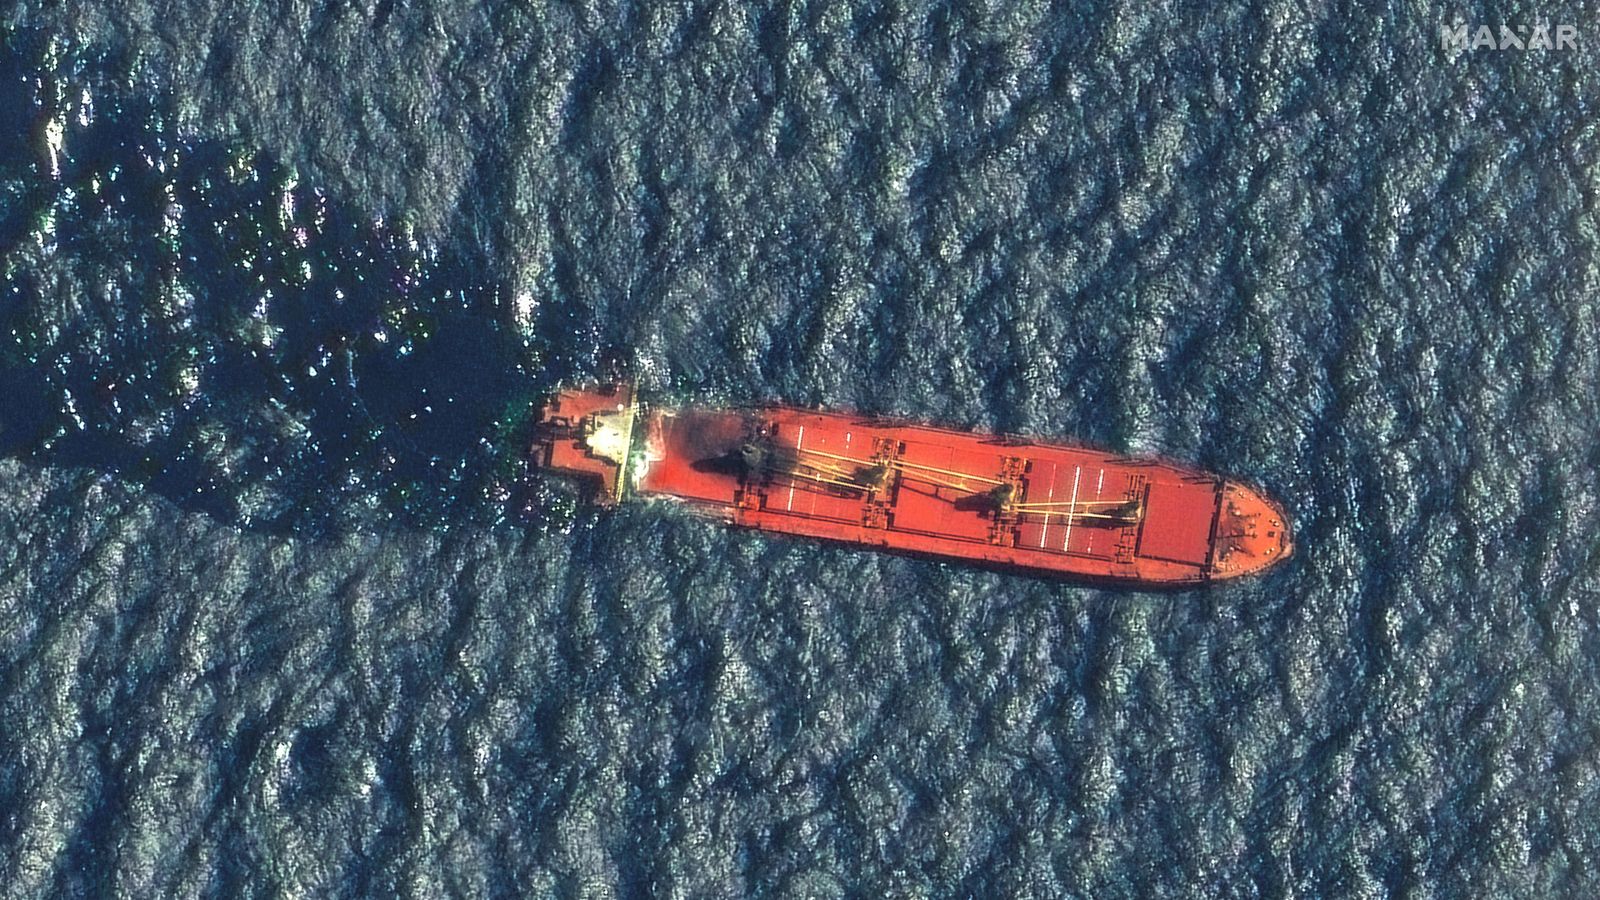 houthis namecheck george galloway in message to sunak as cargo ship sinks